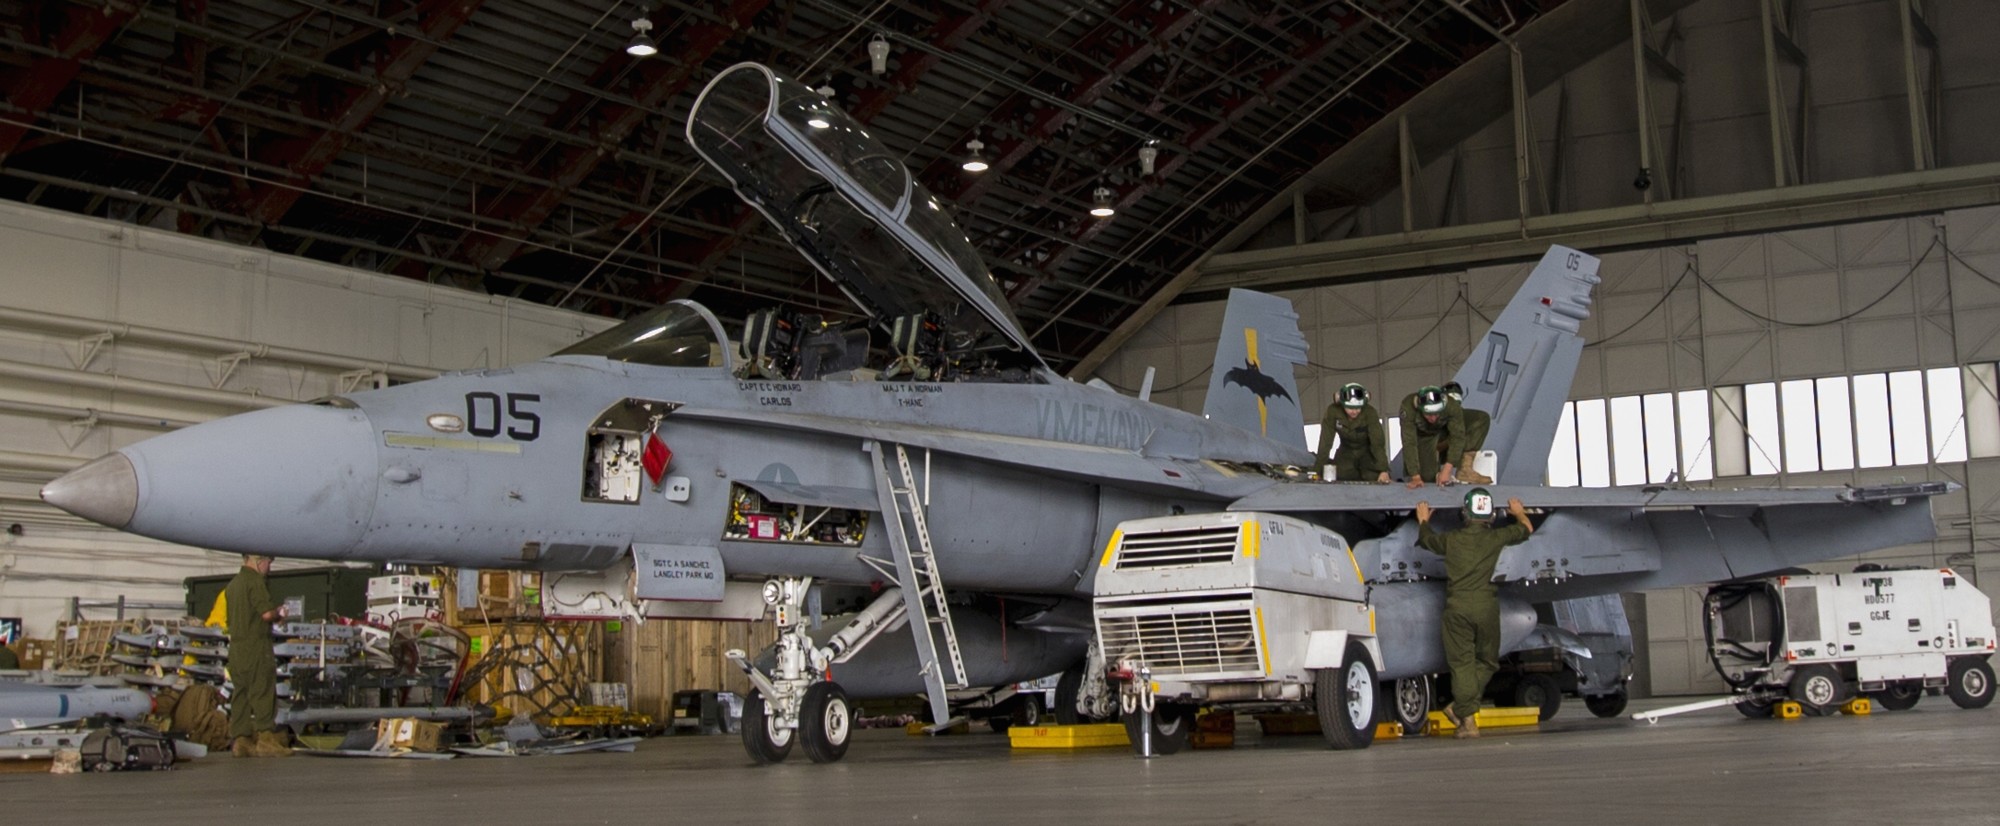 vmfa(aw)-242 bats marine all-weather fighter attack squadron usmc f/a-18d hornet 44